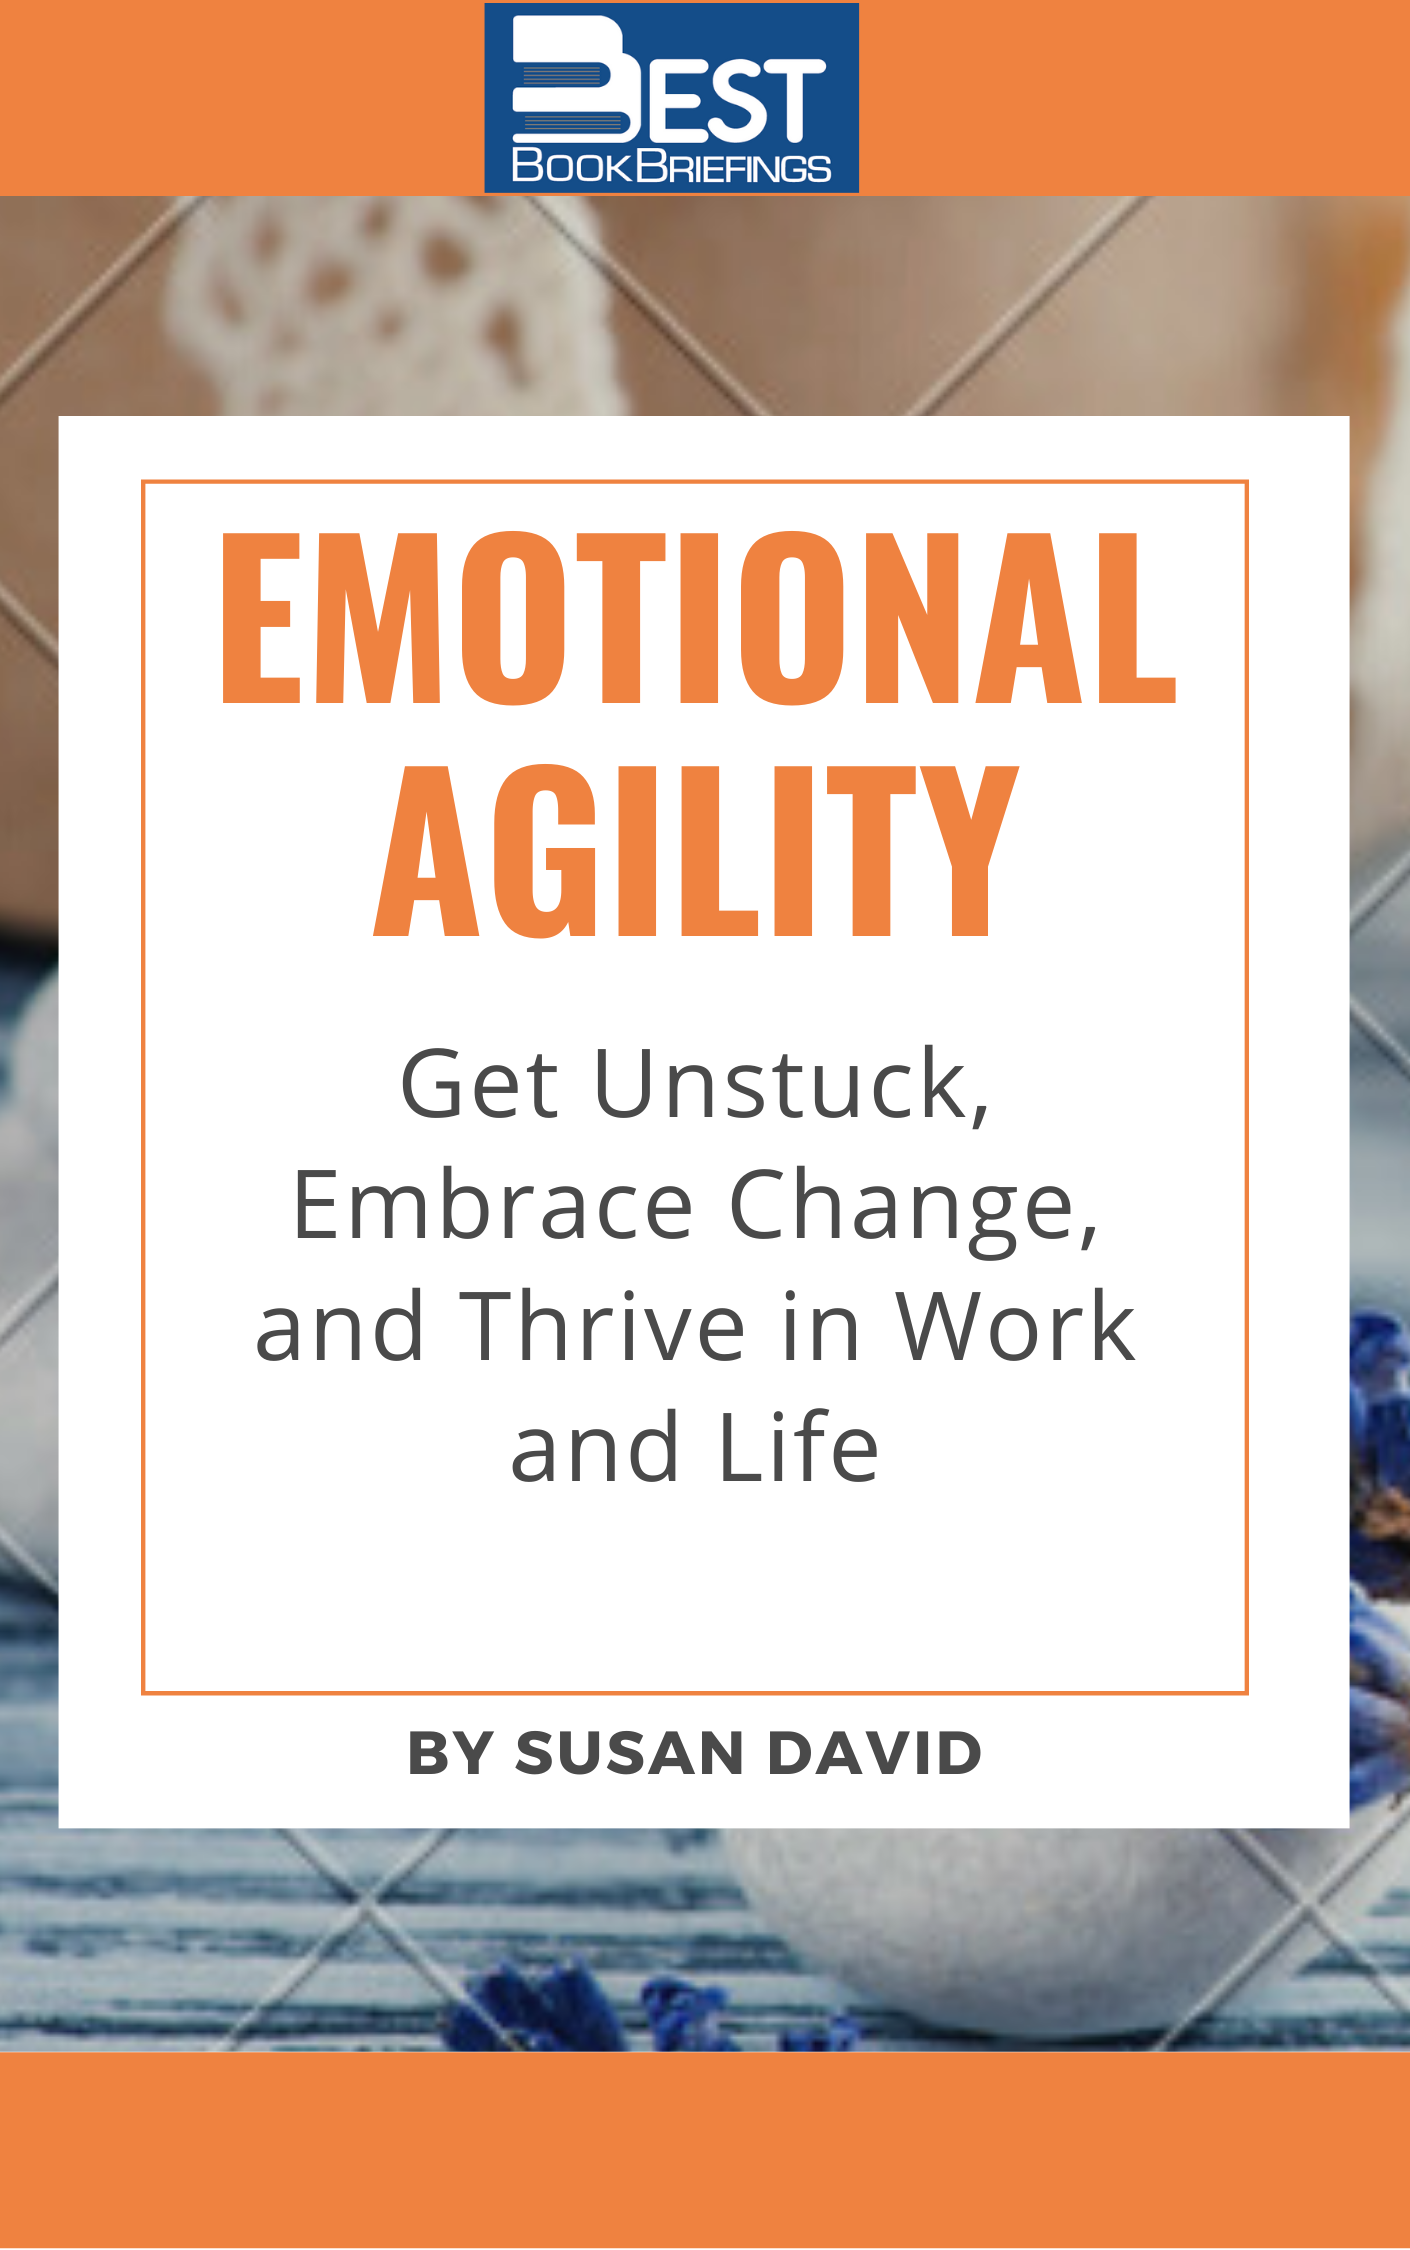 Summary of Emotional Agility by Susan David. This summary intends to increase your awareness of your own emotions and to help you come to peace with even the difficult ones. According to the author, Susan David, if you want to control your emotions, you need to address your thinking patterns and 